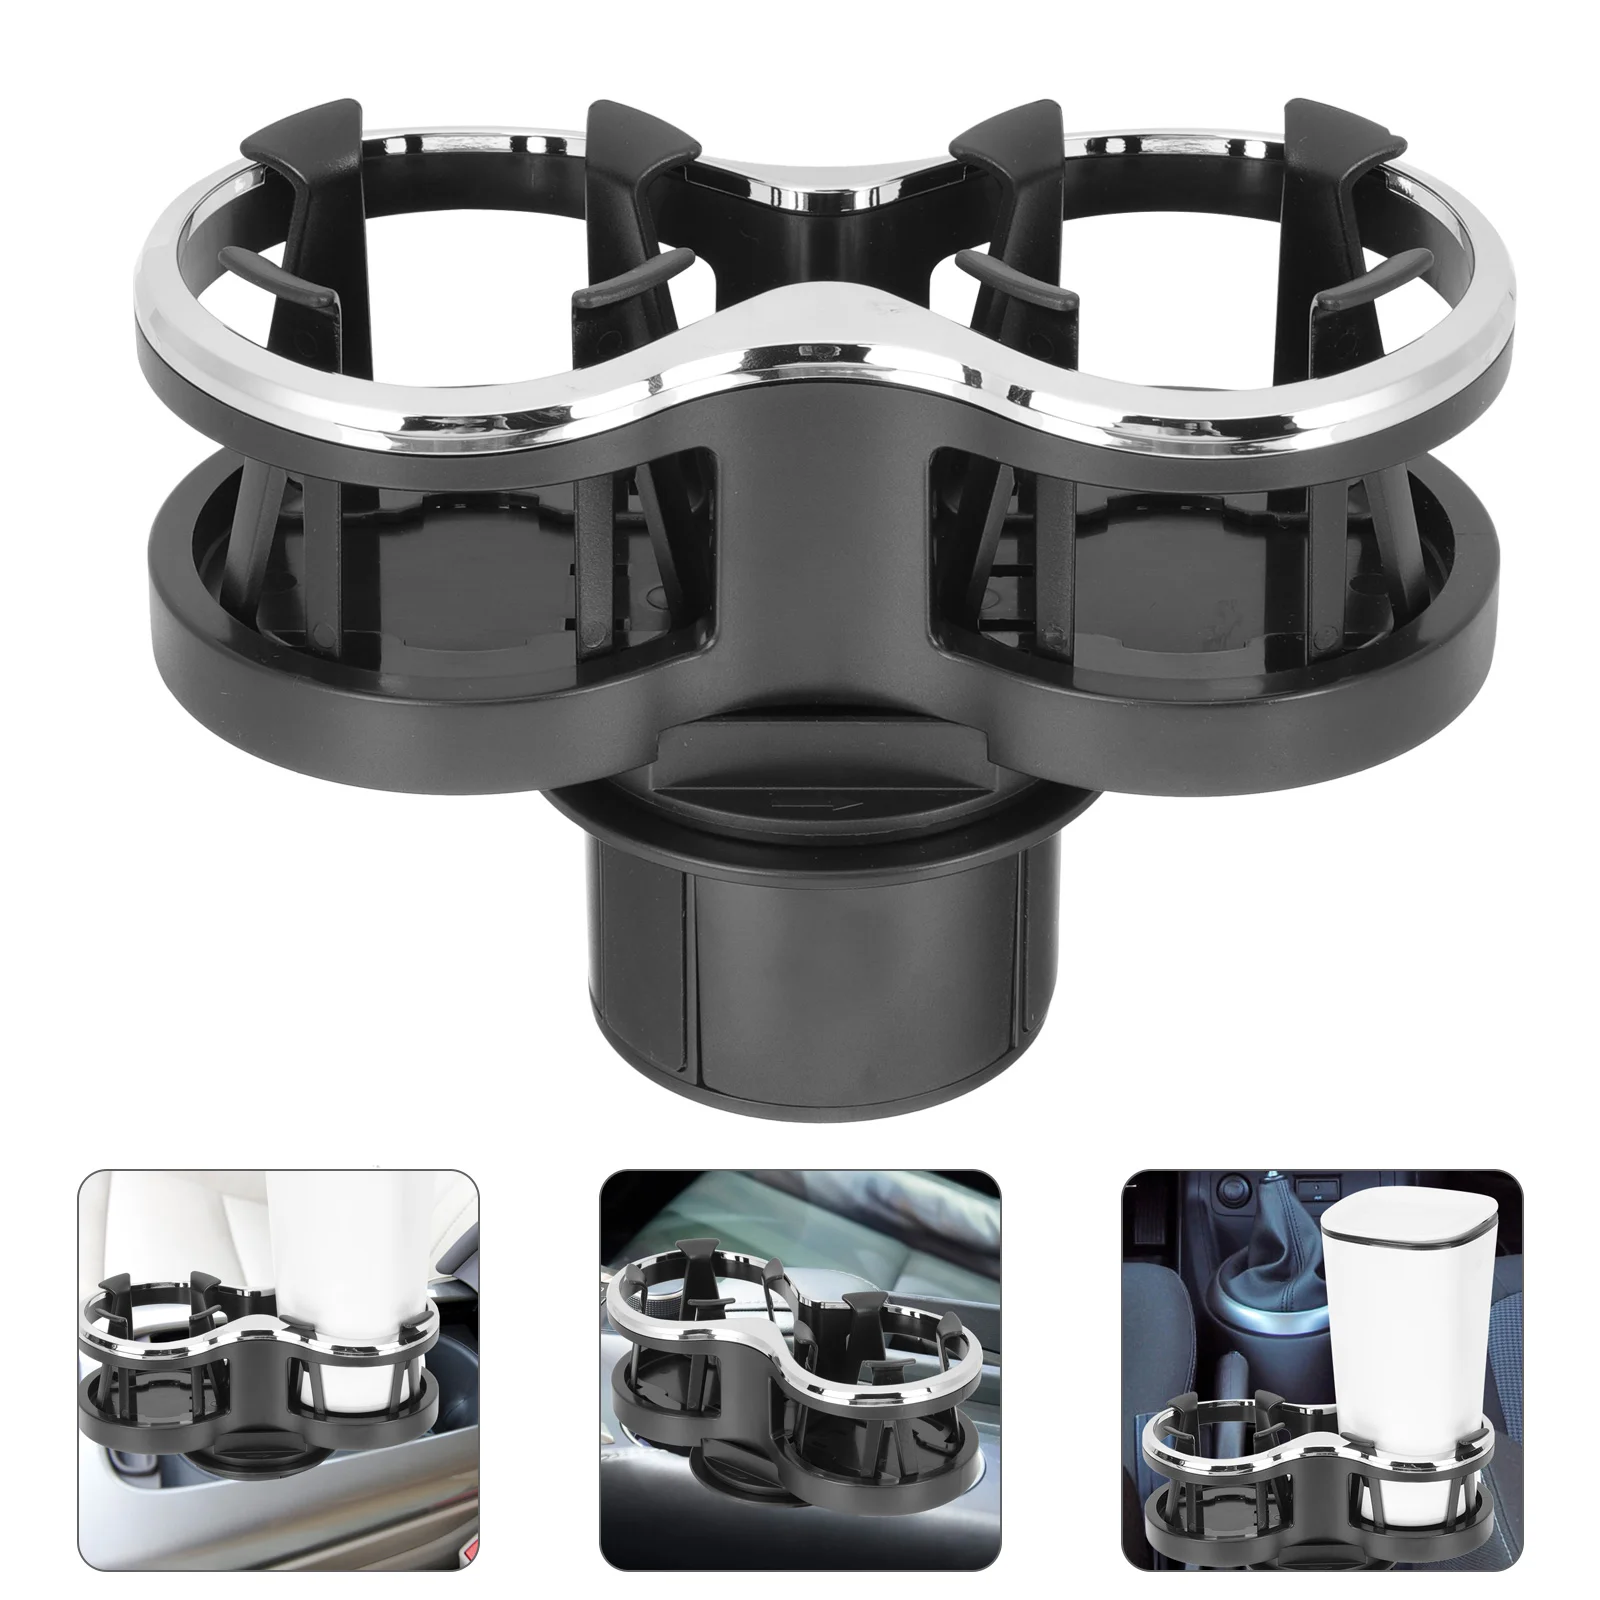 

Cup Holder Expander Extender Car Vehicle Water Rack Drink Mounted Dual Slots Accessory Outdoor Multi Function Expandable Adapter